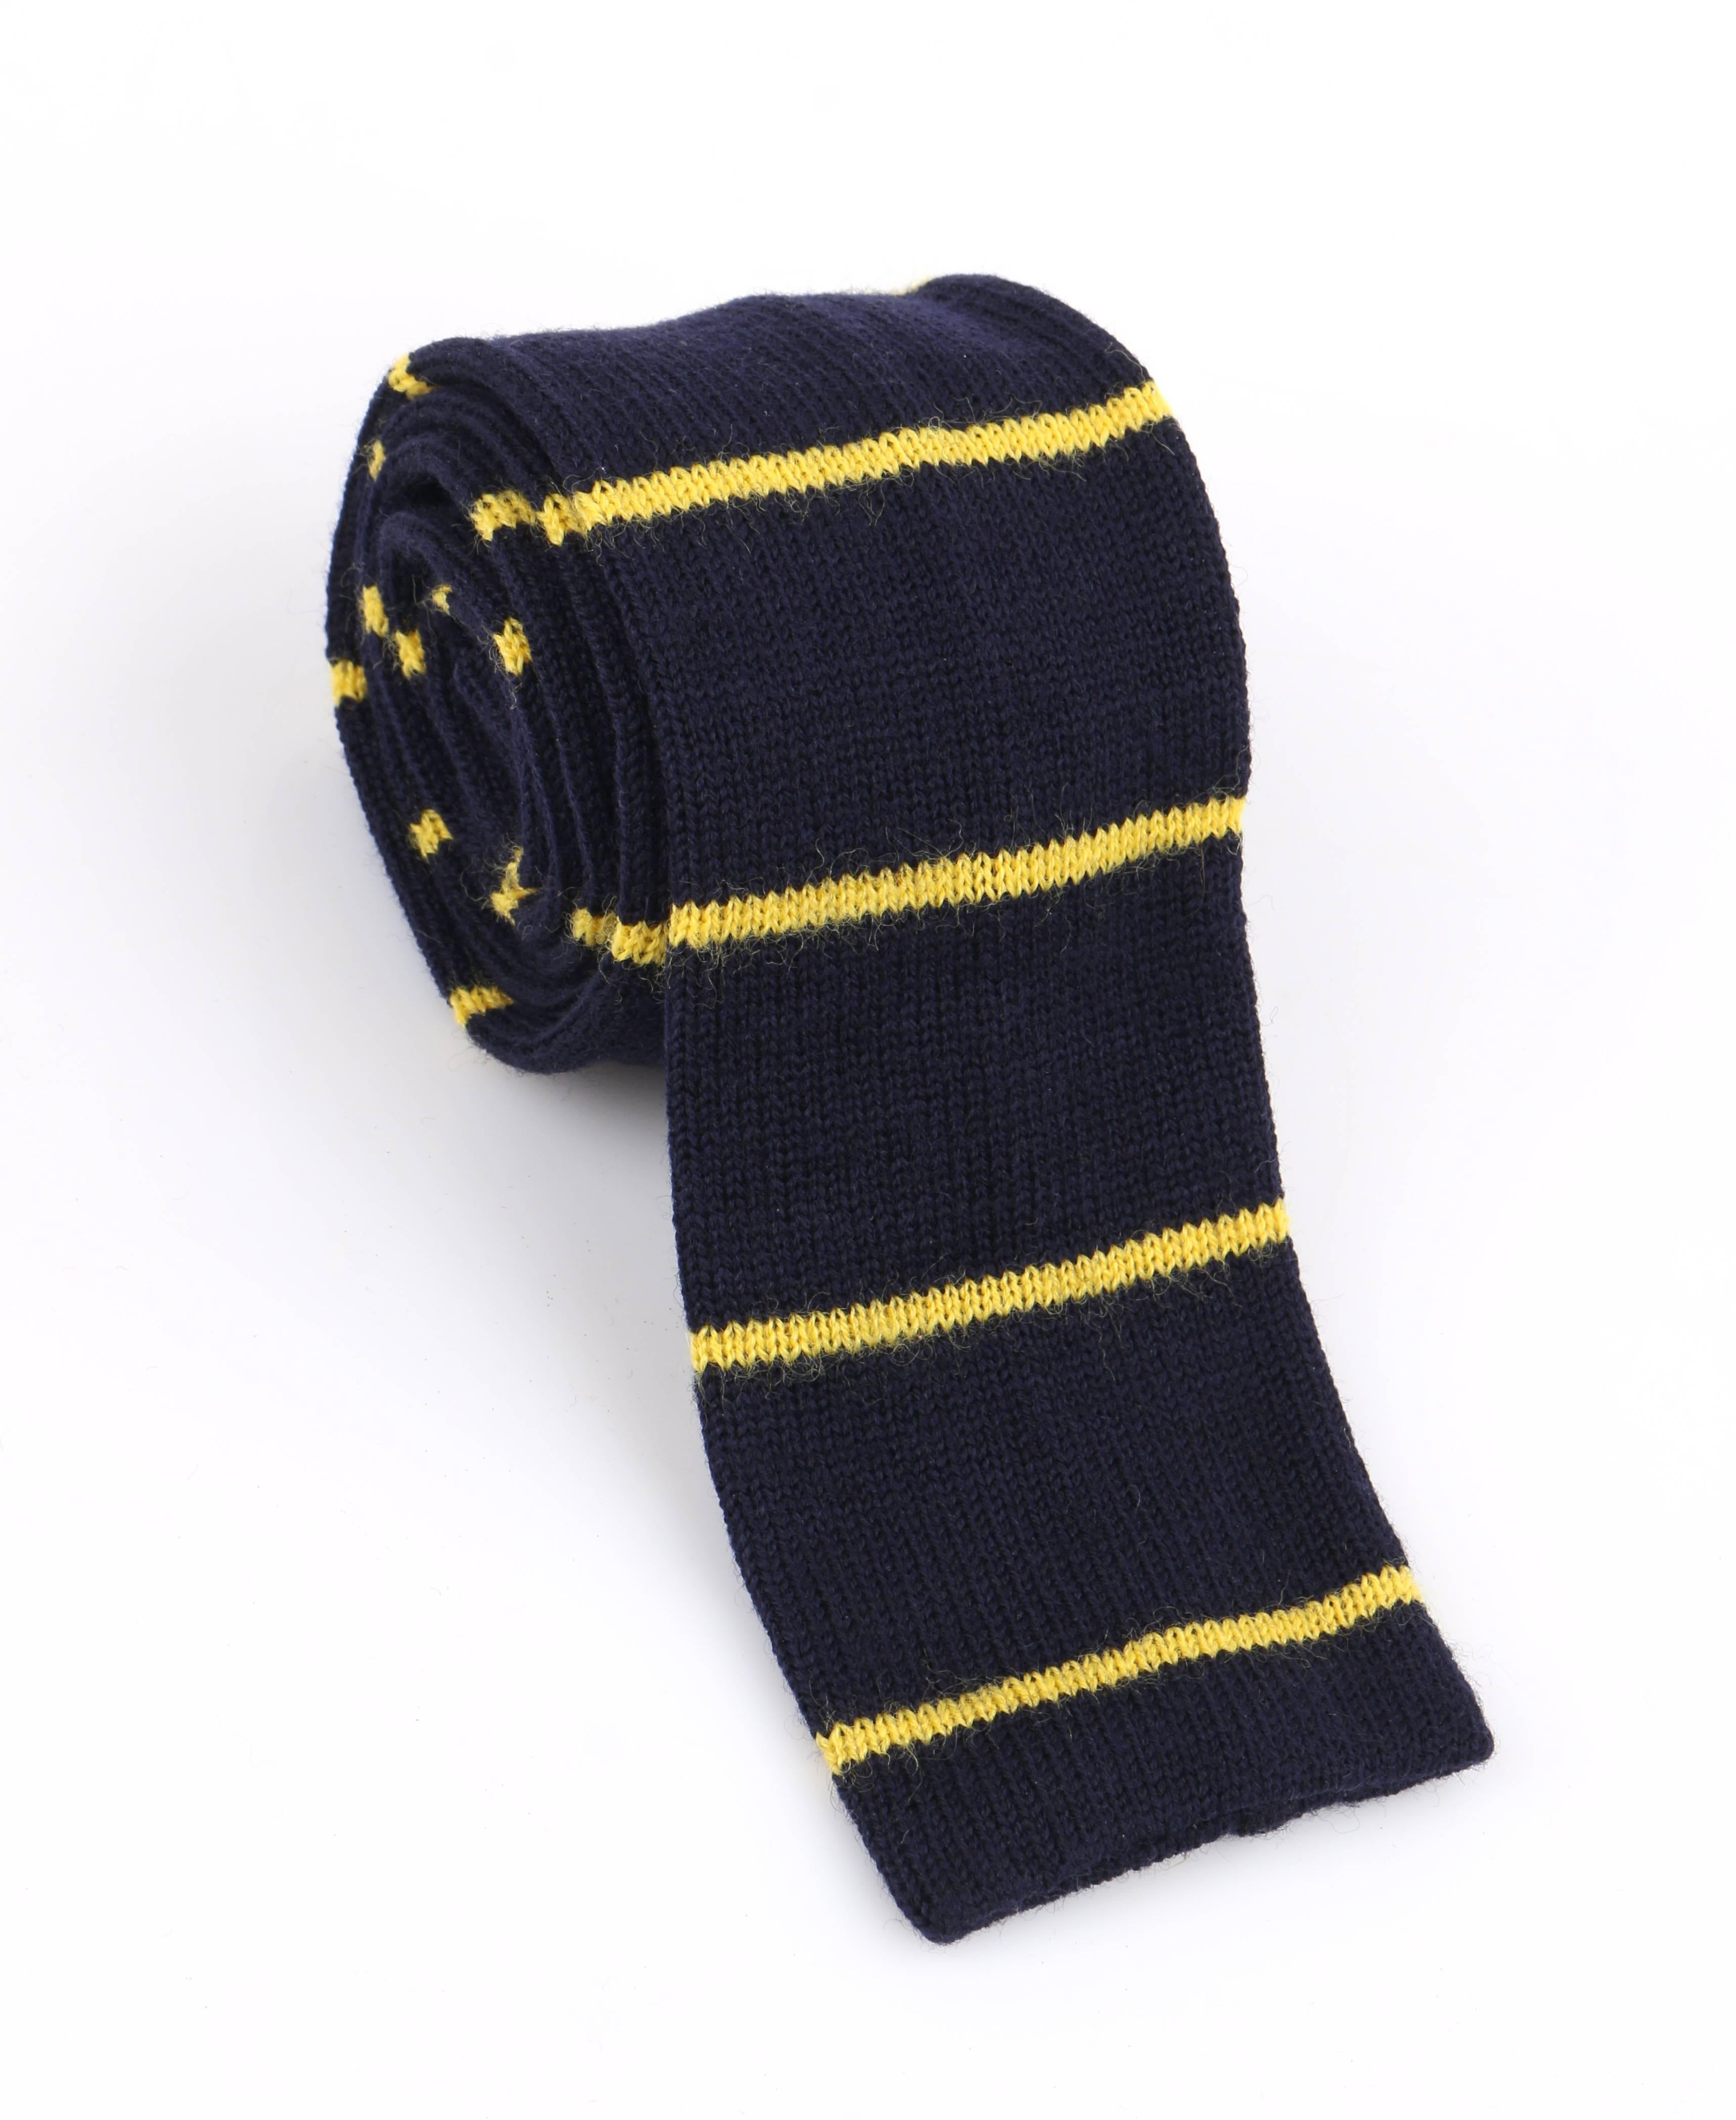 Vintage Gucci c.1980's navy blue and yellow striped wool knit necktie; New old stock. Navy blue and yellow horizontal striped knit. Square end. Marked Fabric Content: 